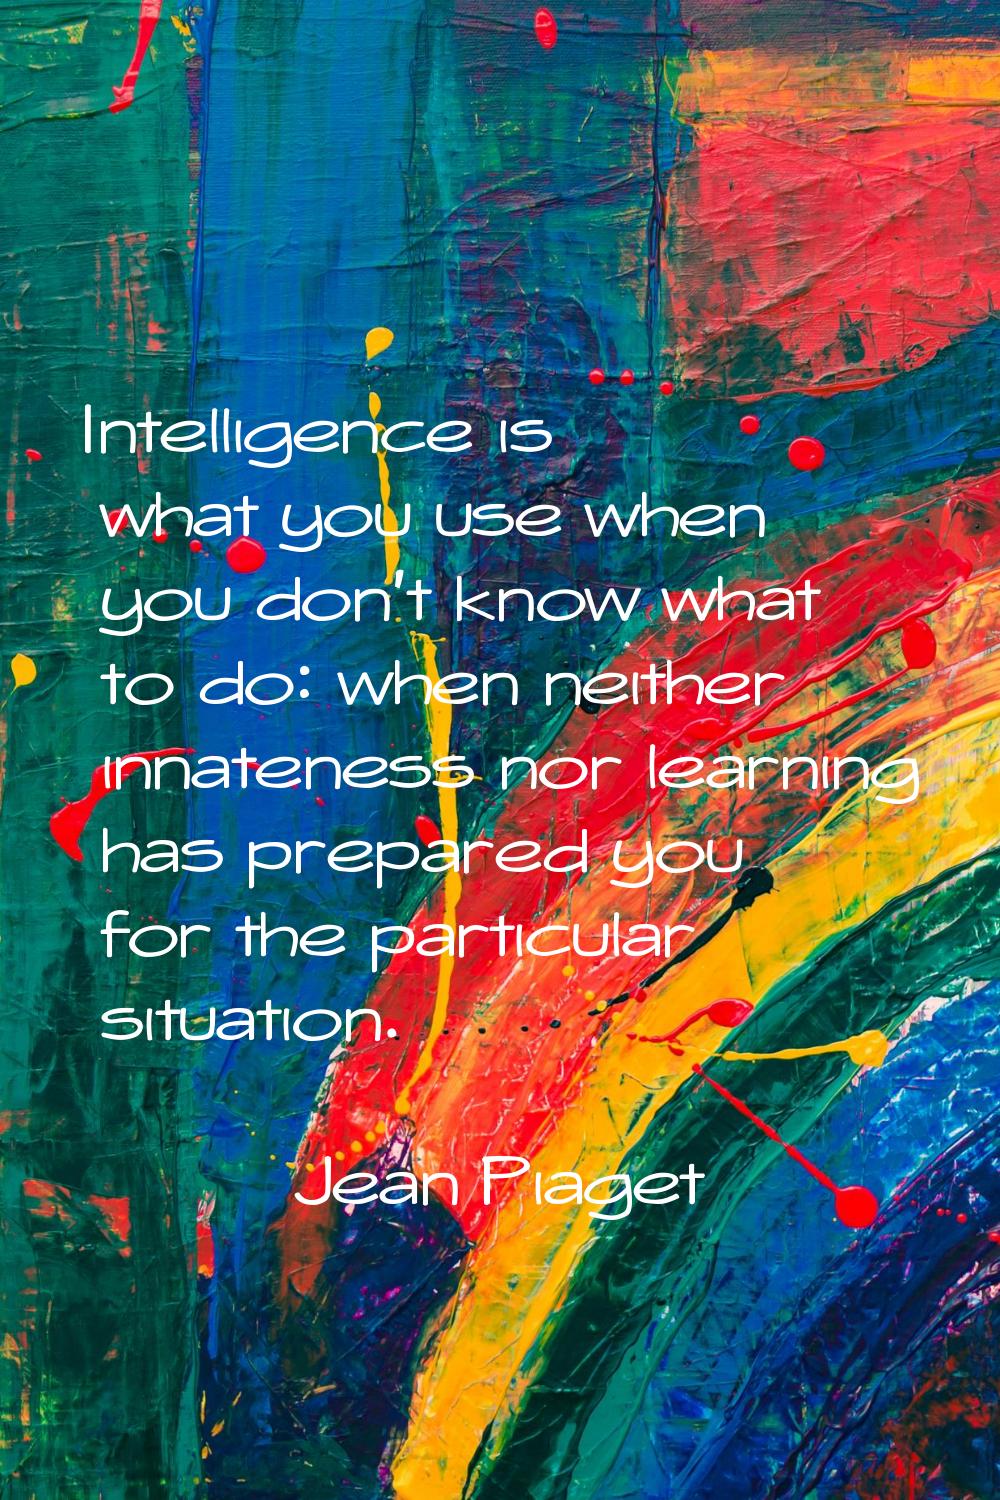 Intelligence is what you use when you don't know what to do: when neither innateness nor learning h